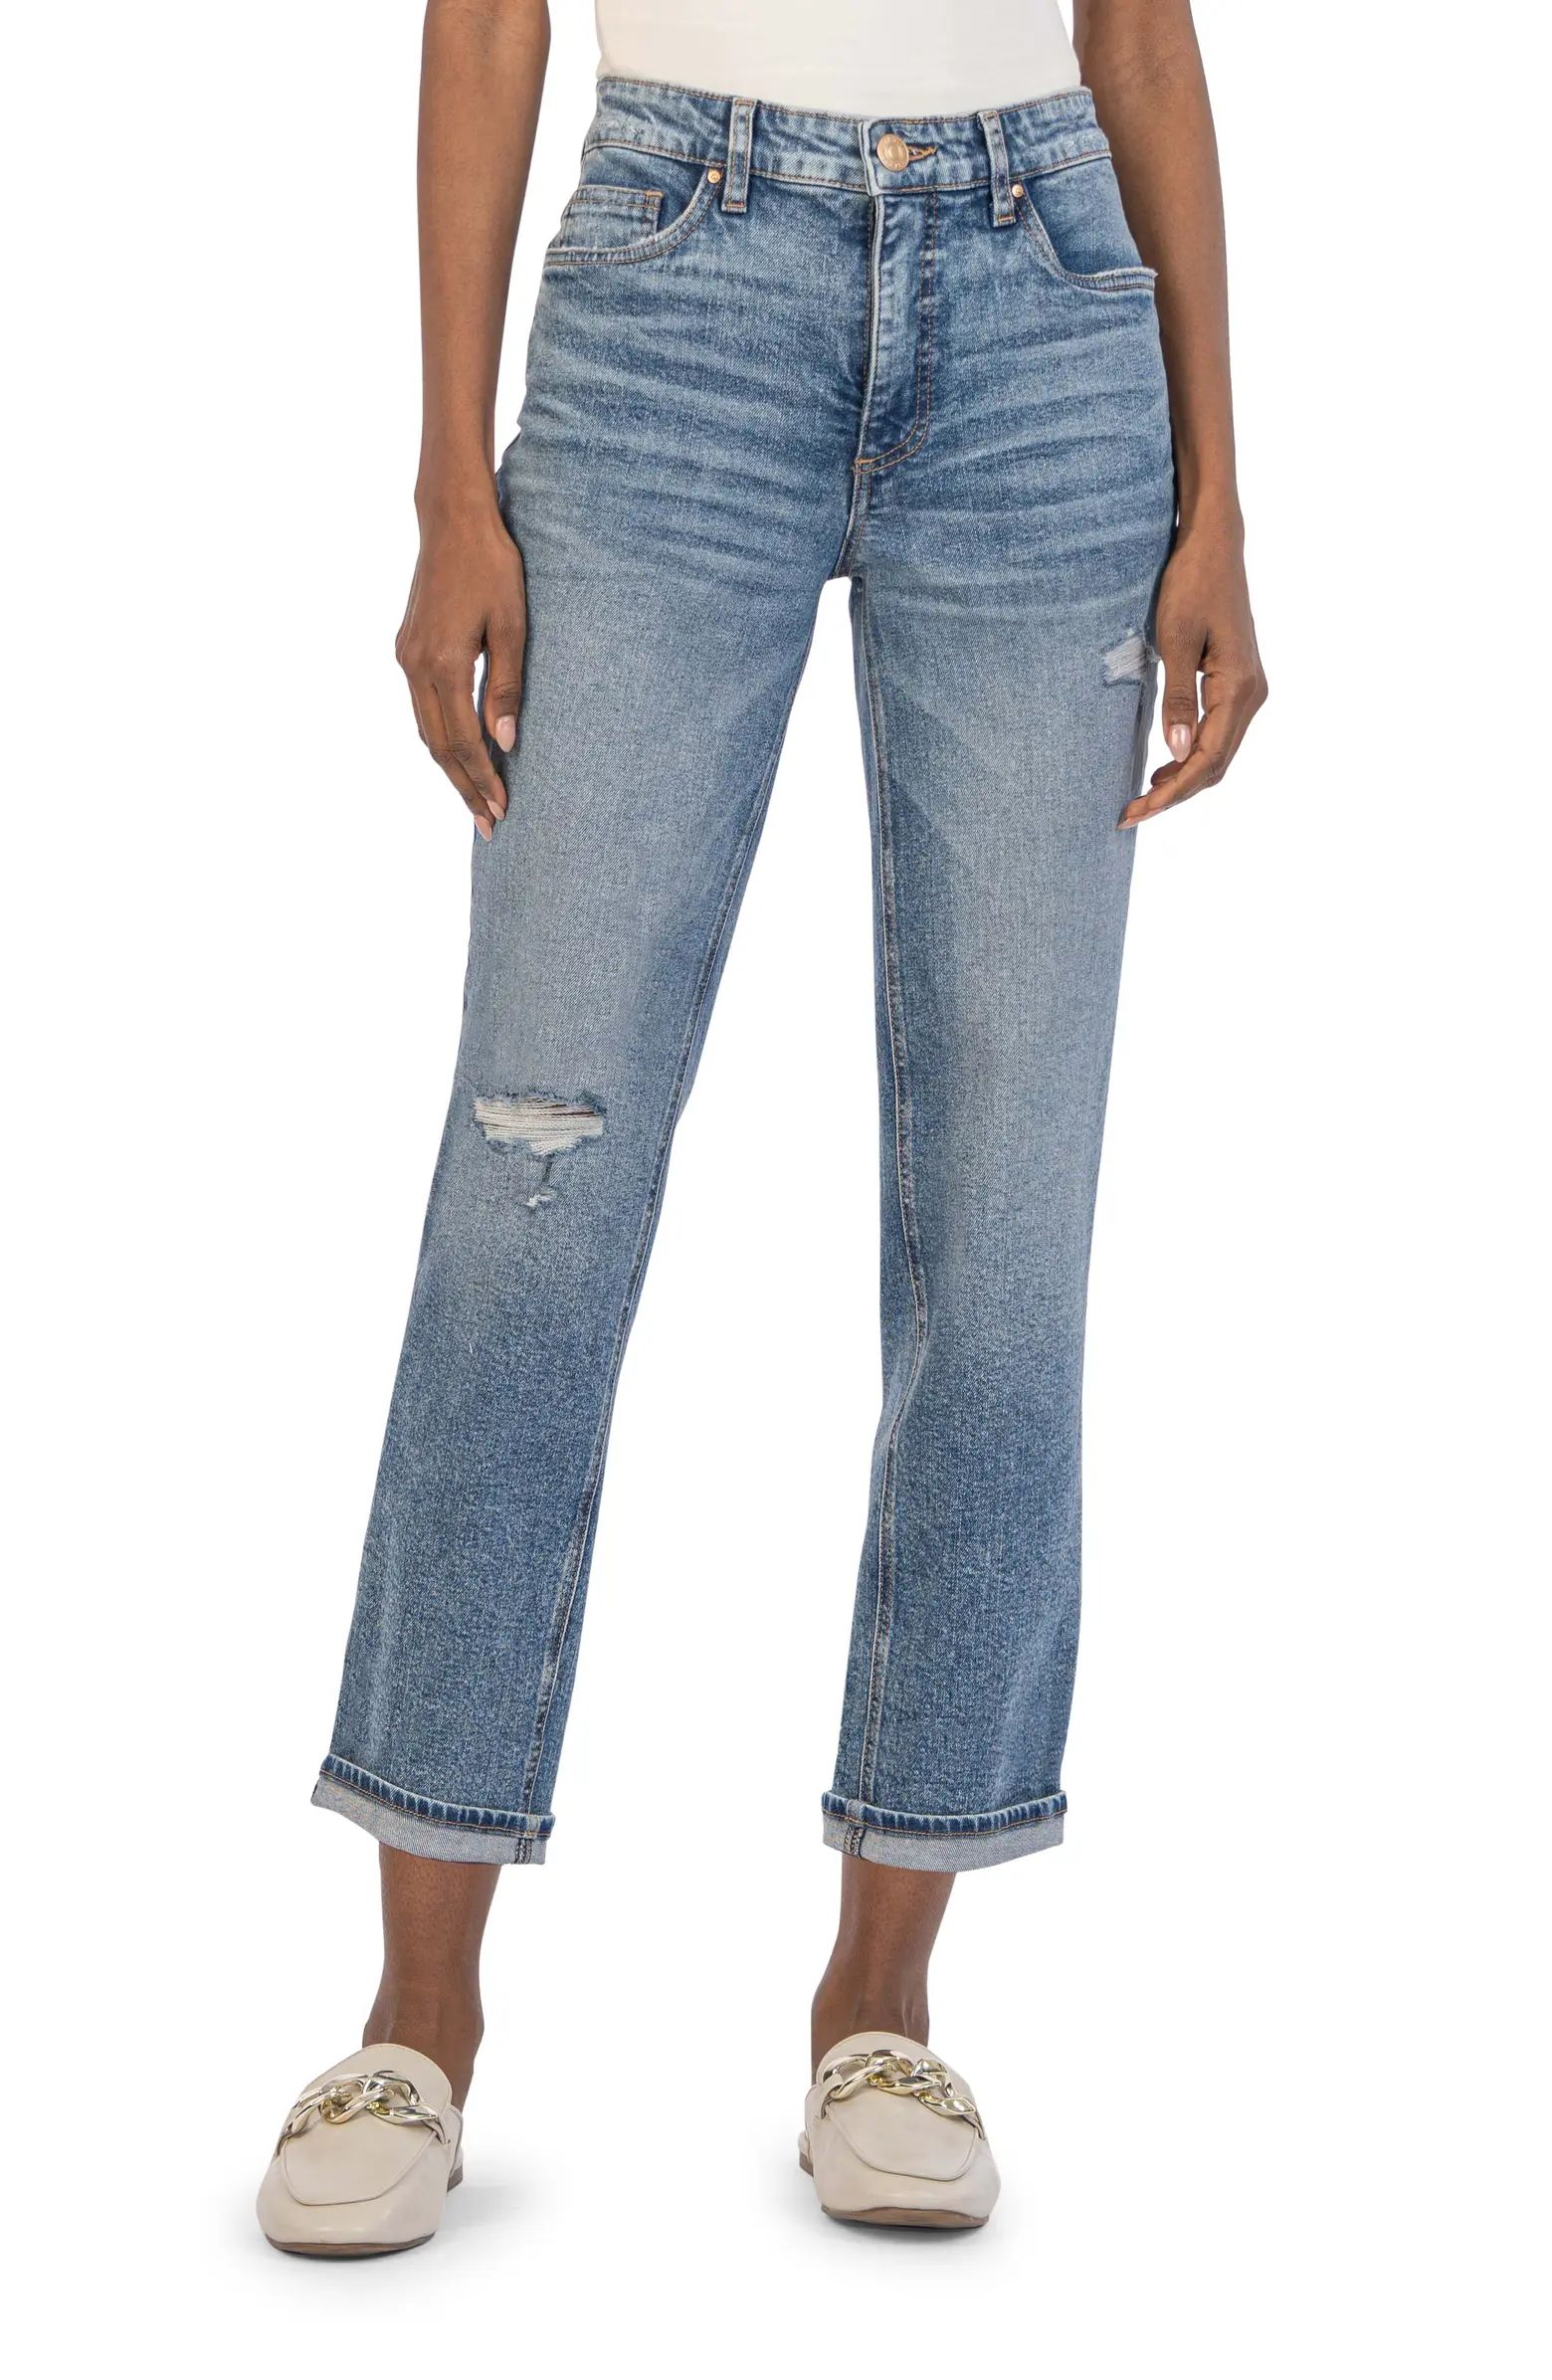 KUT from the Kloth Rachael Fab Ab High Waist Mom Jeans | Nordstrom | Nordstrom